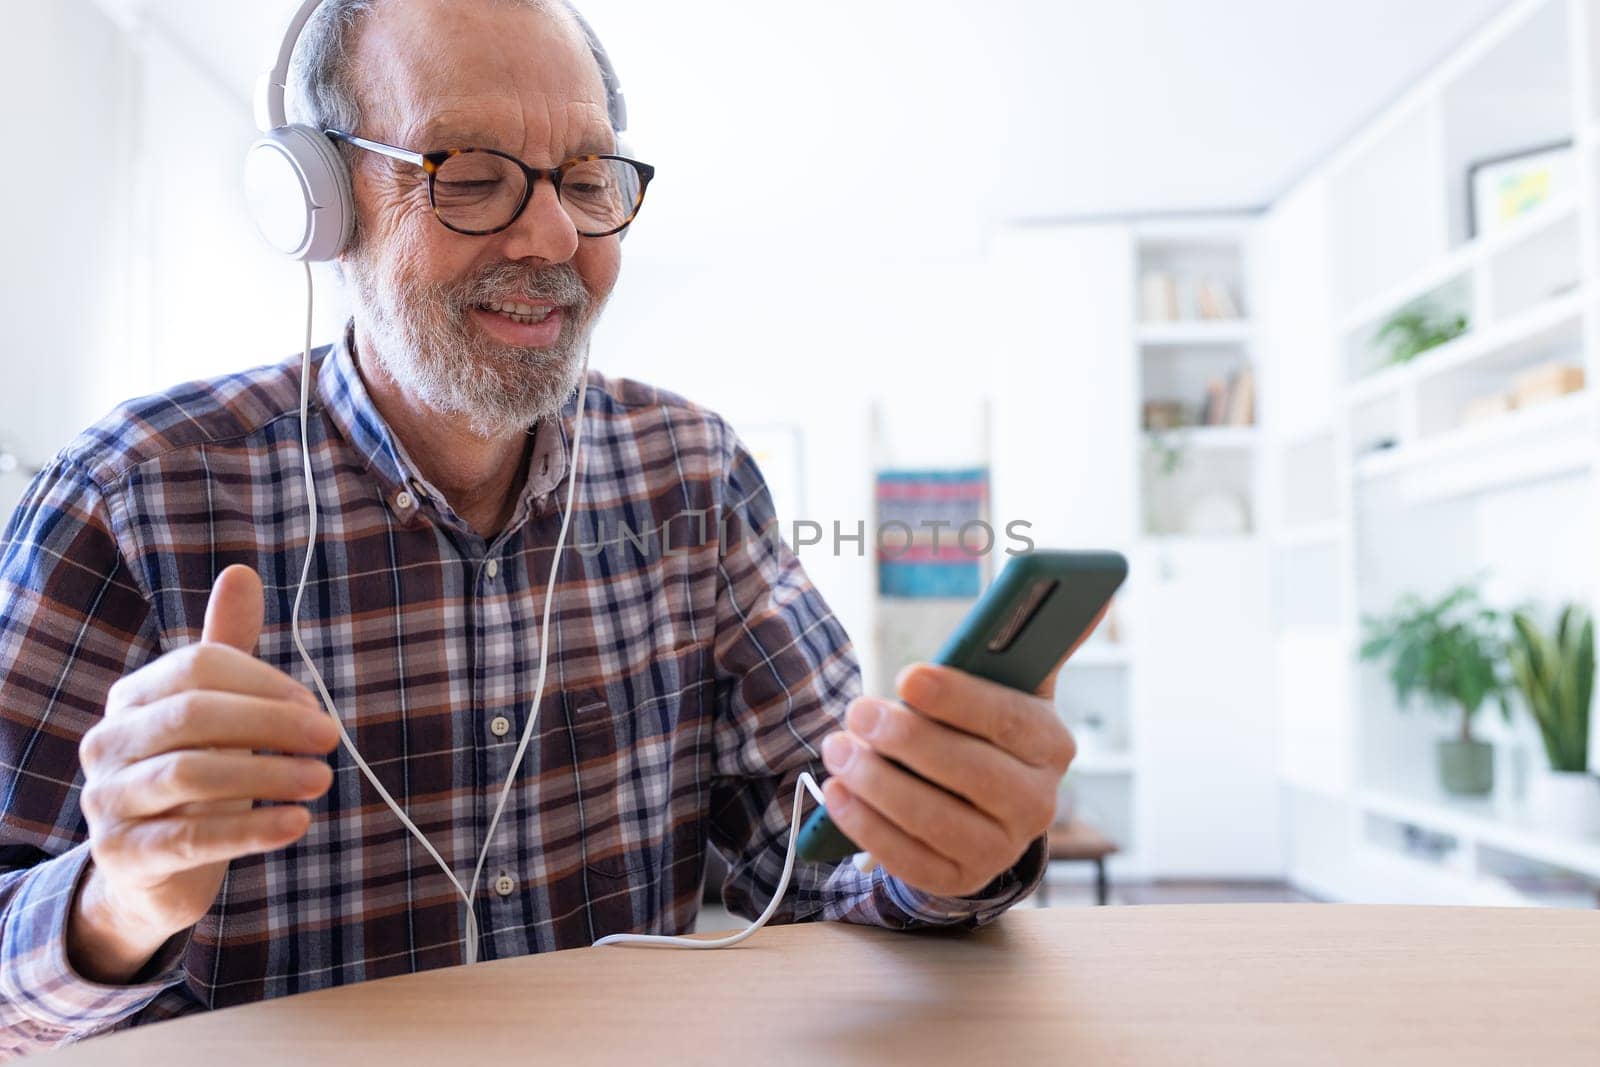 Senior man listening to music and dancing using mobile phone and headphones at home living room. Technology and lifestyle concept.